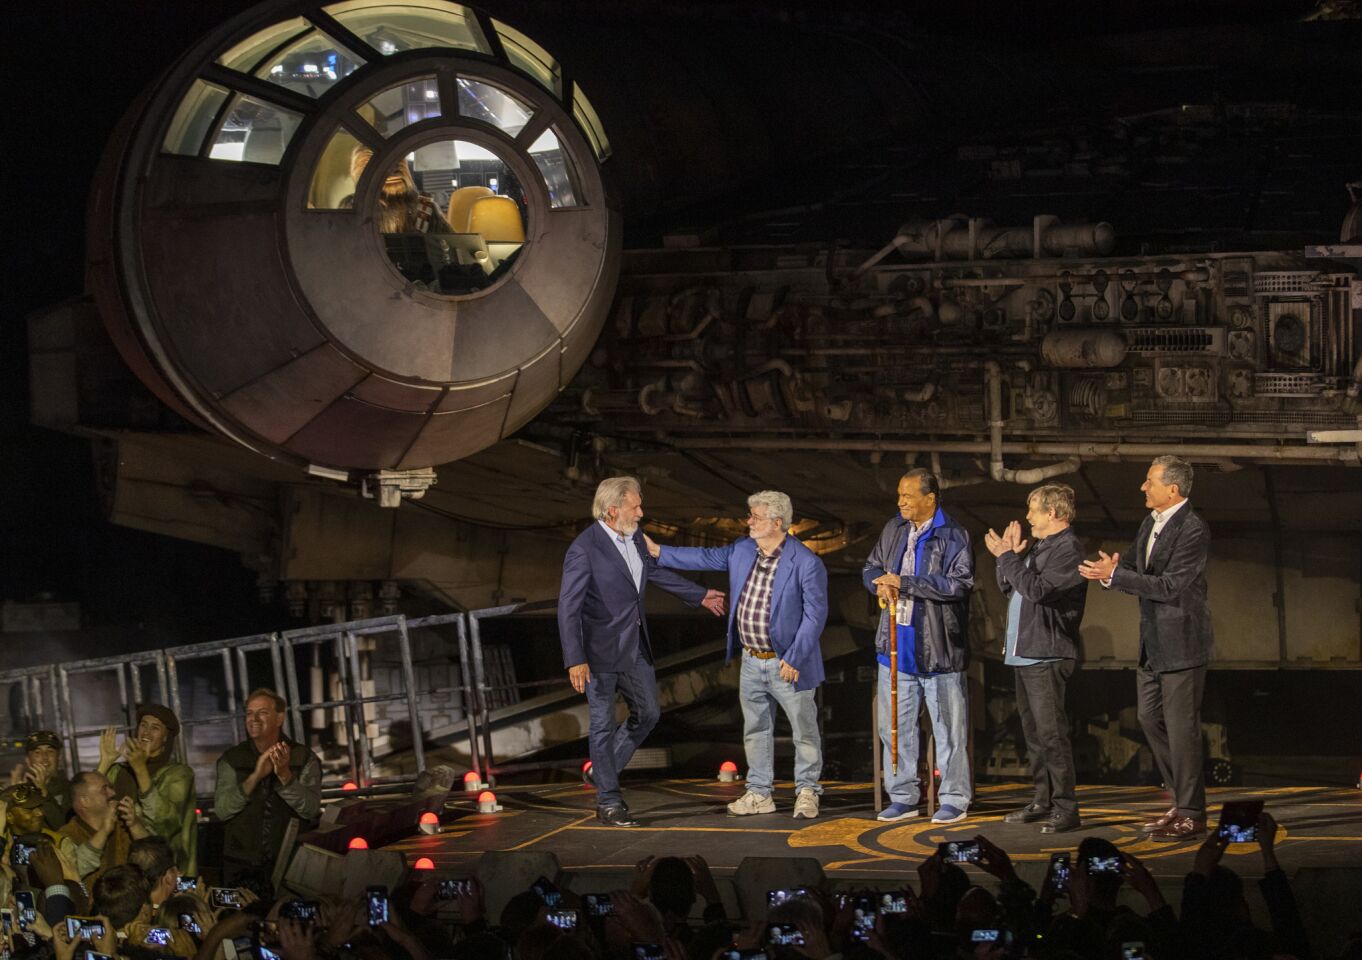 Chewbacca watches from the driver's seat as Harrison Ford, left, is greeted by George Lucas, while Billy Dee Williams, Mark Hamill and Bob Iger stand in front of the Millennium Falcon during the Star Wars: Galaxy's Edge unveiling event.